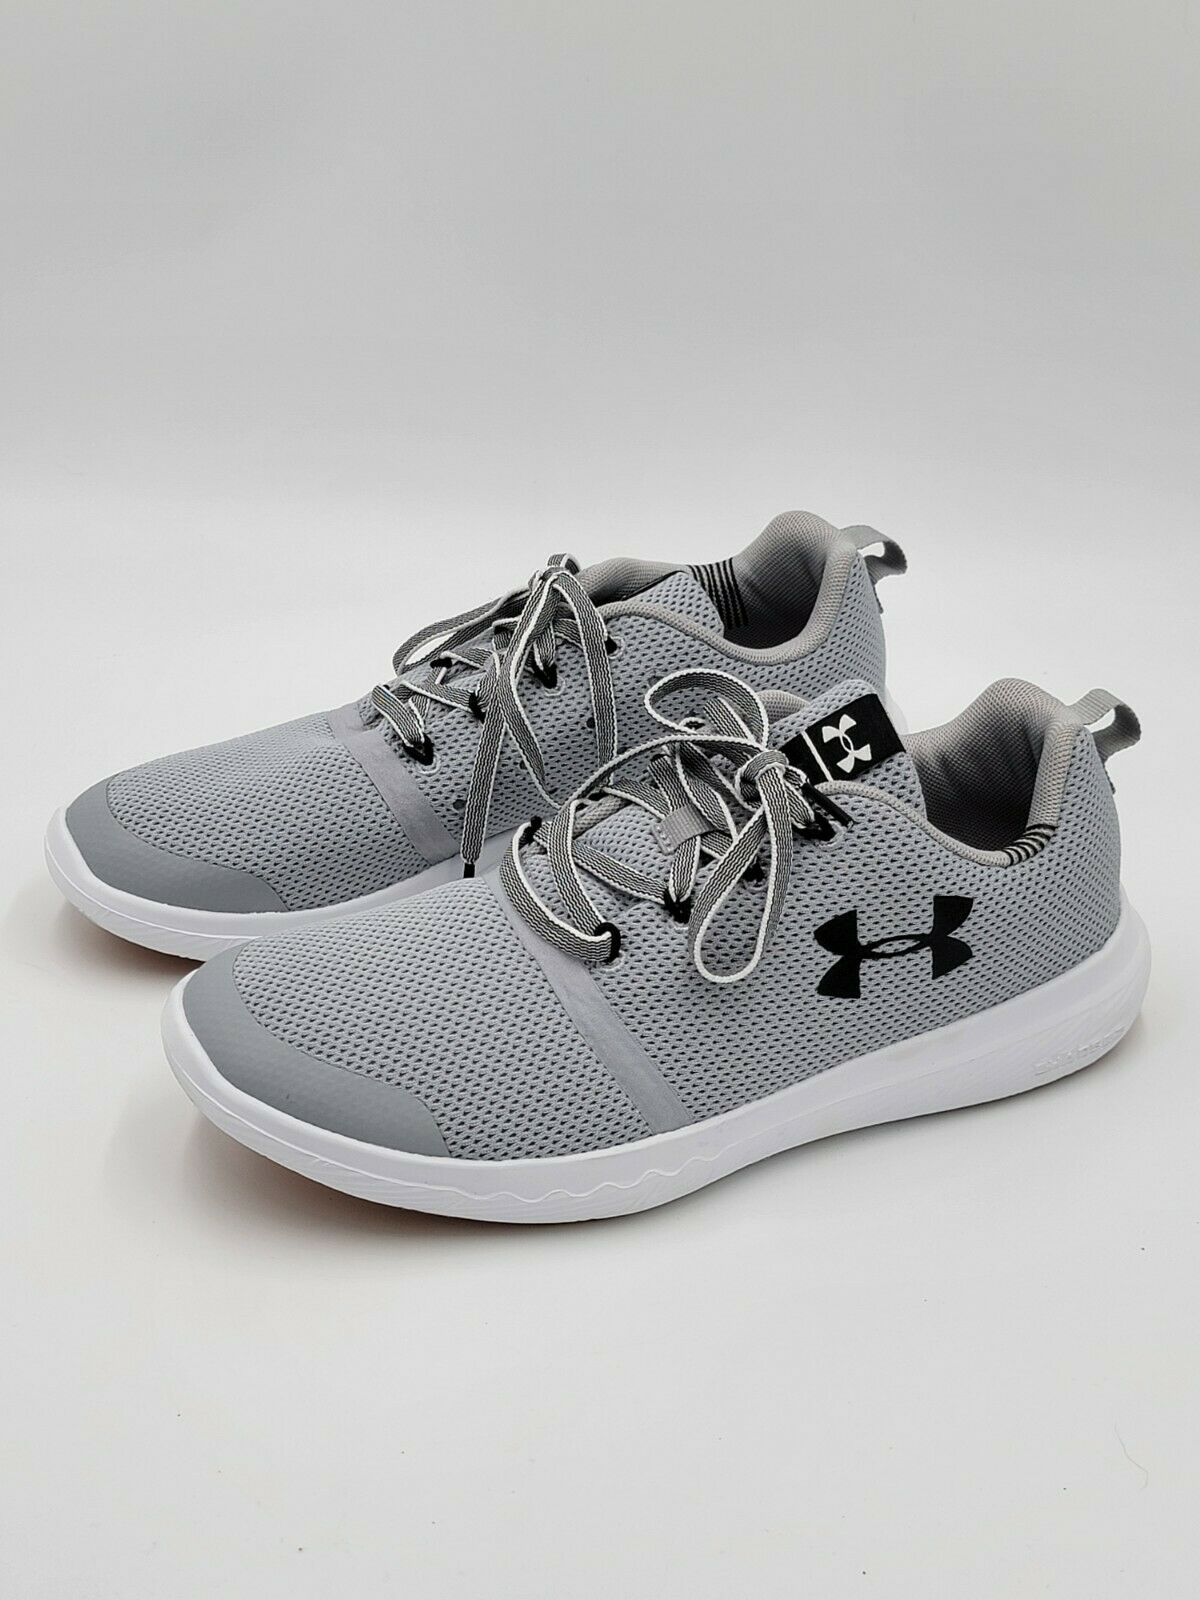 Under Armour Charged Pursuit Youth Size 6Y Walking Sneakers Shoes Gym ⚓⚓⚓